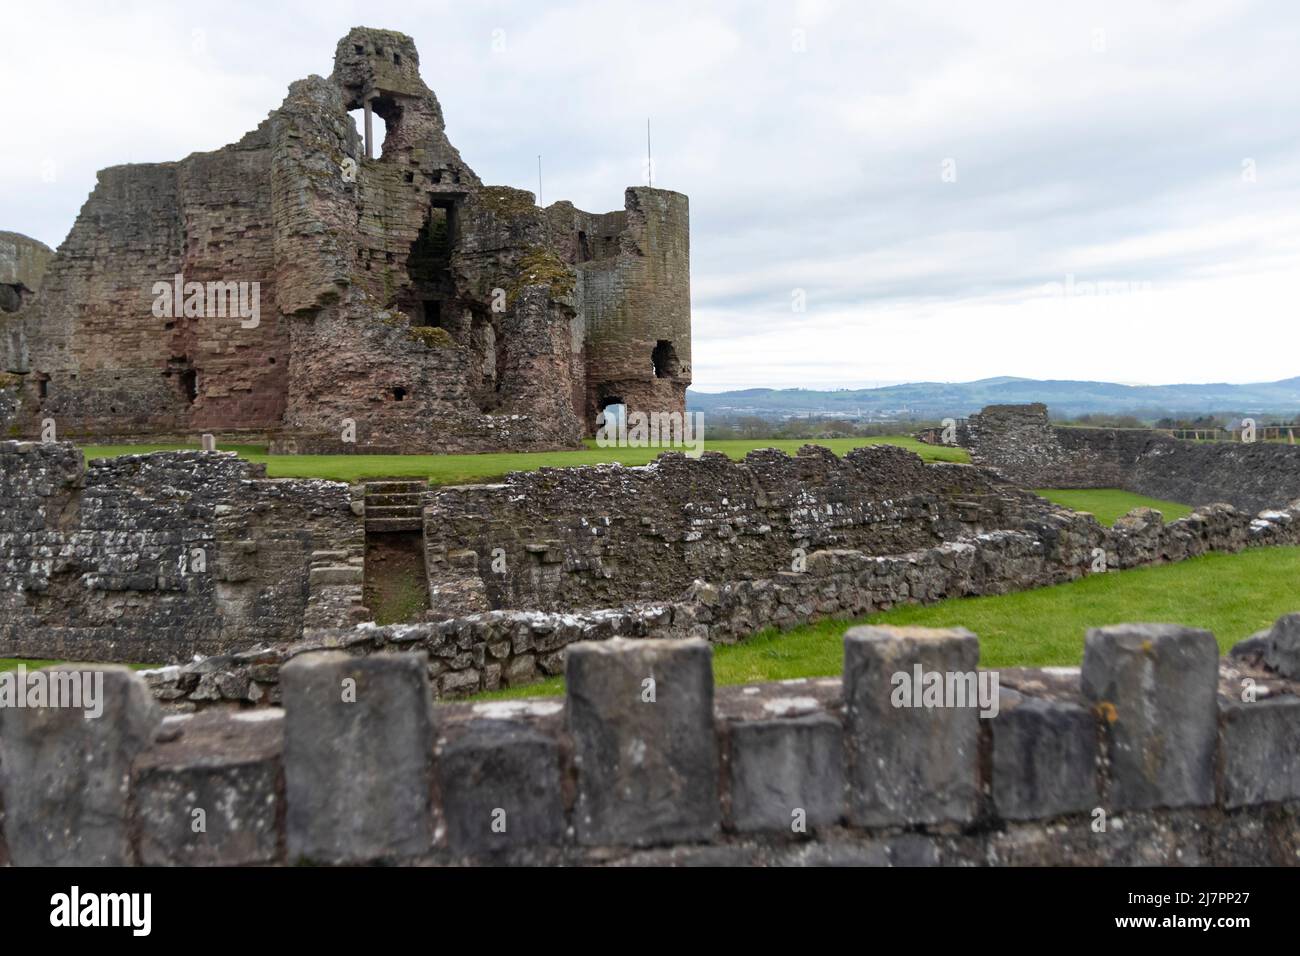 North view of Rhuddlan Castle, erected in 1277 next to the River Clwyd Stock Photo